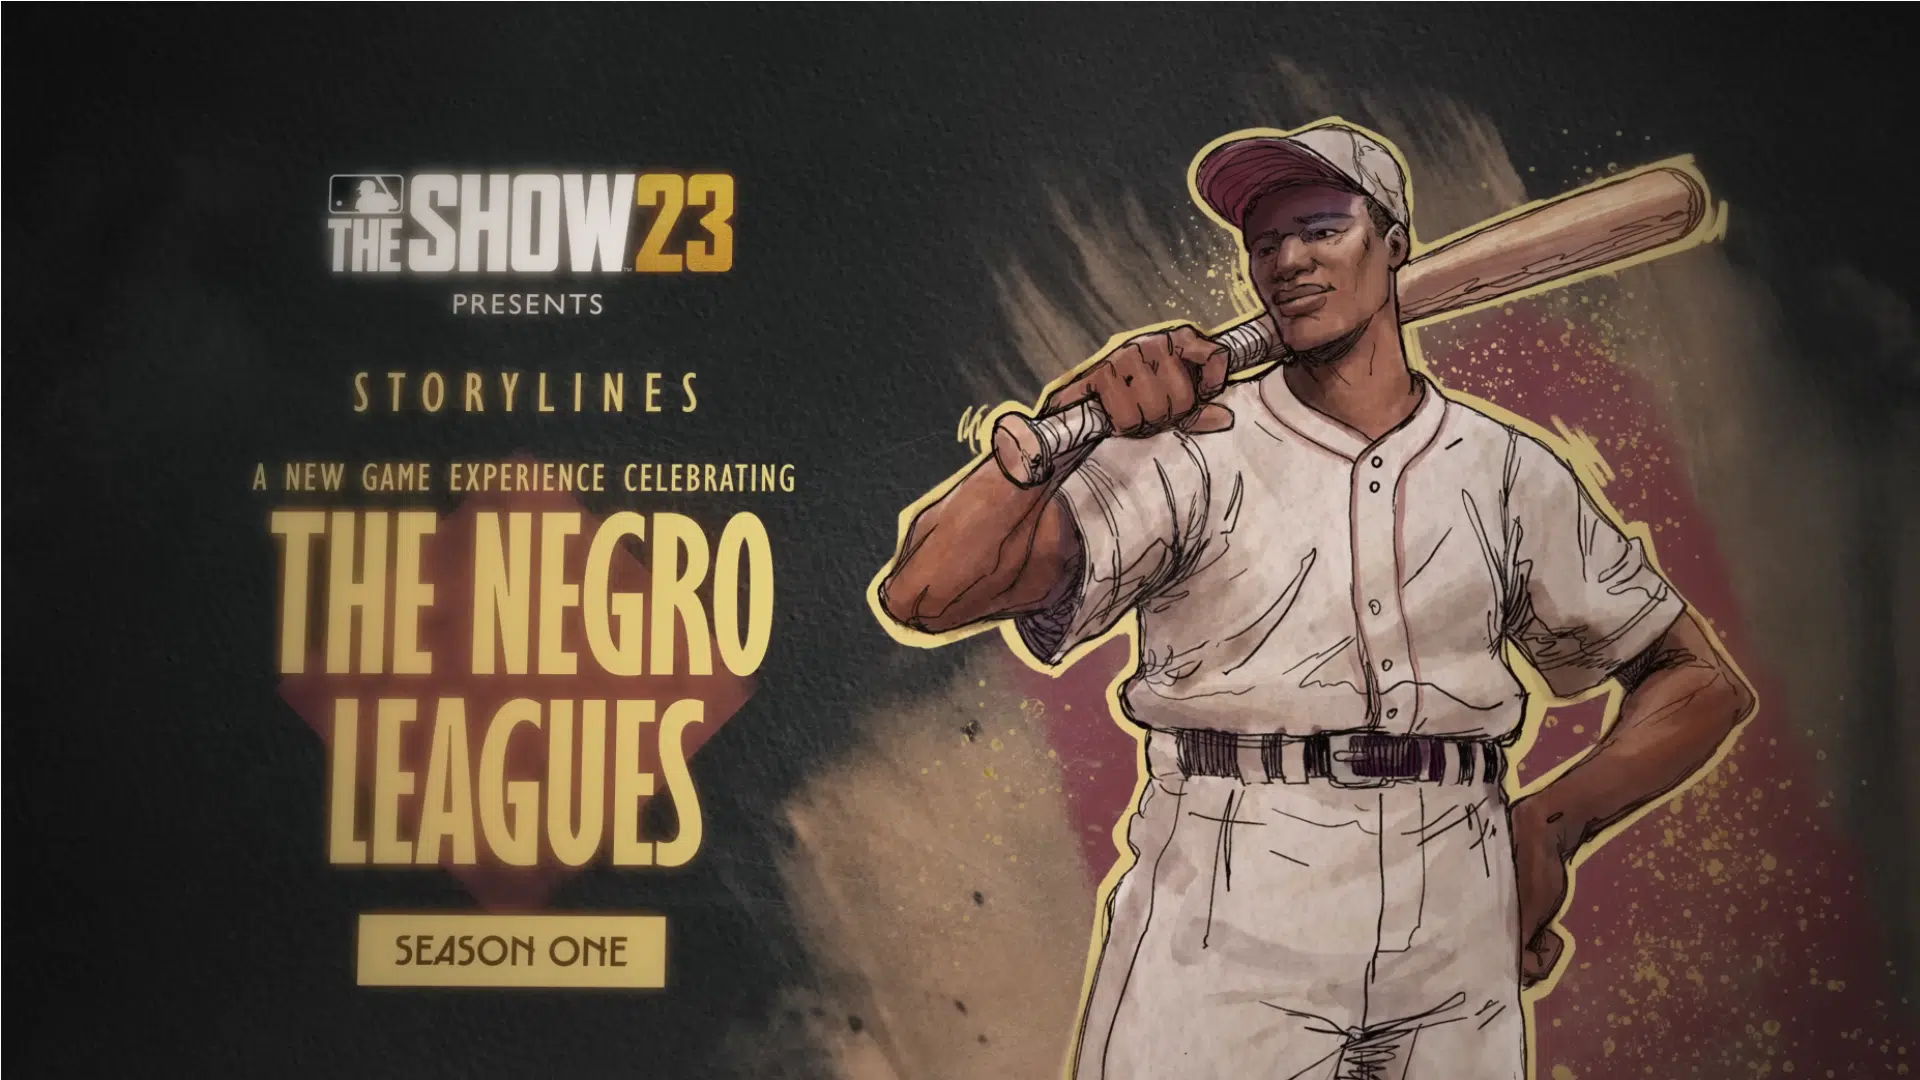 MLB The Show 23 Storylines Negro Leagues Season 1